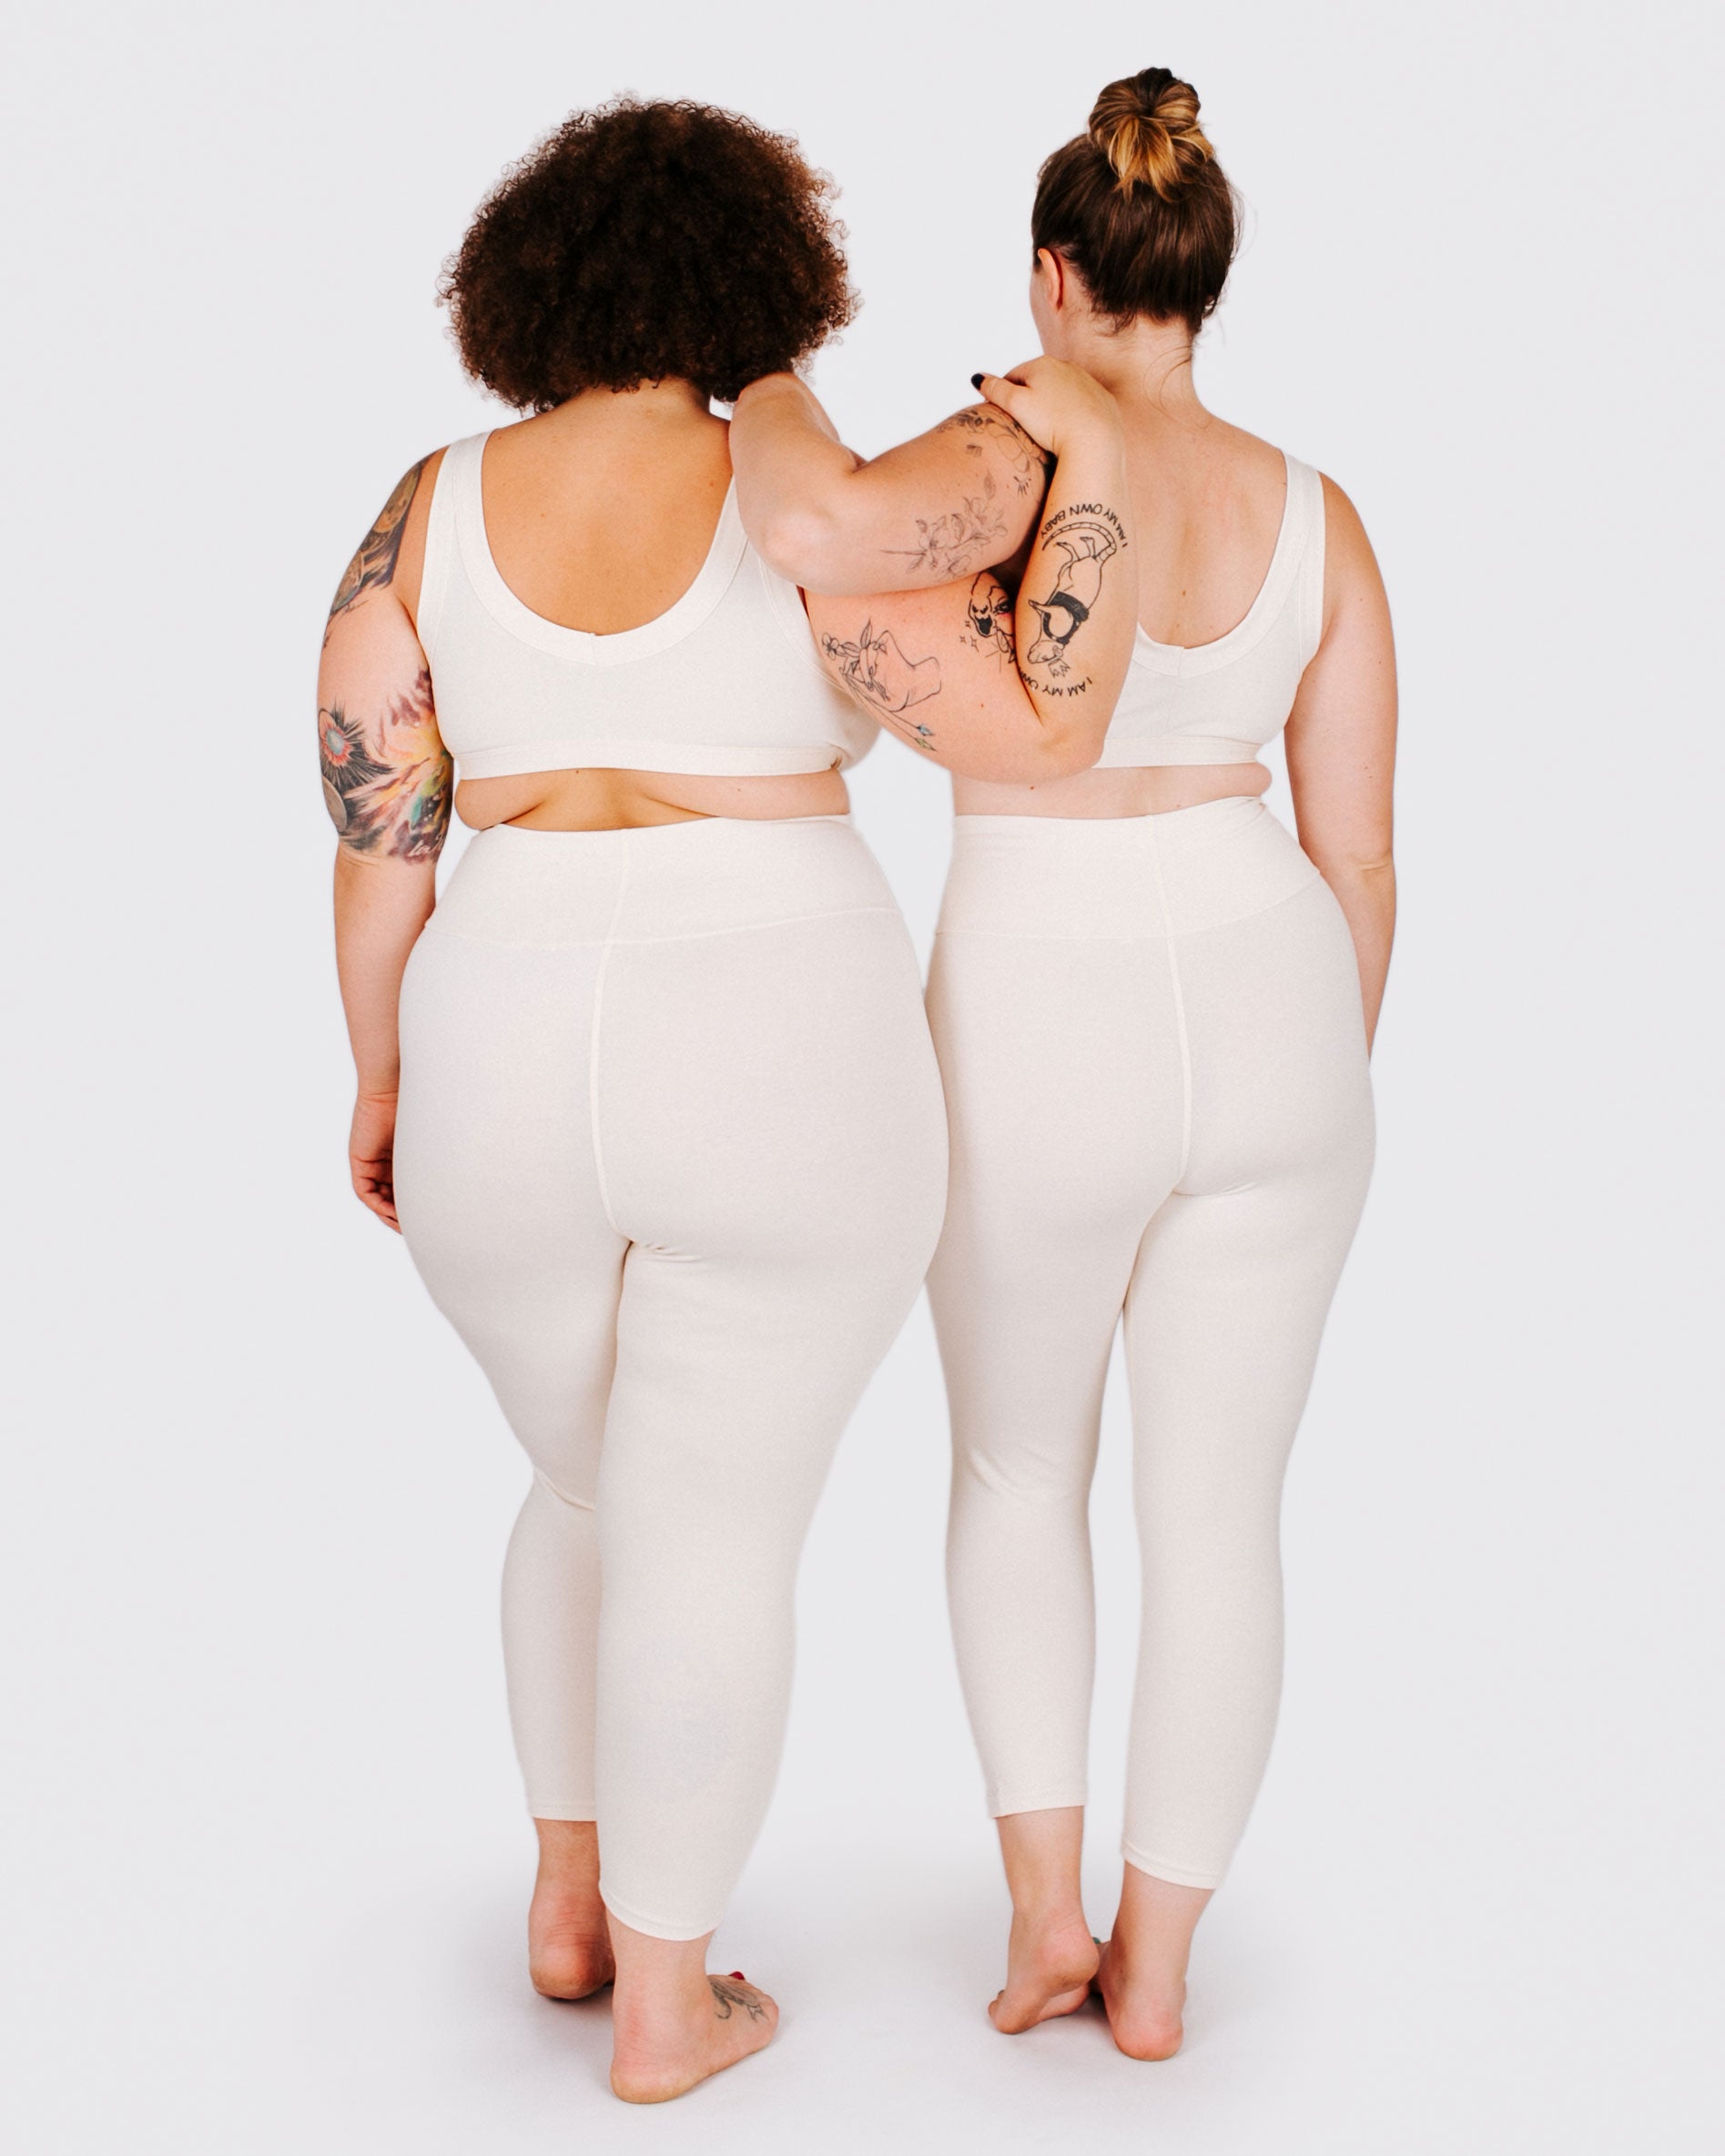 Fit photo from the back of Thunderpants organic cotton 3/4 Length Leggings and Bralettes in off-white on two models standing together.